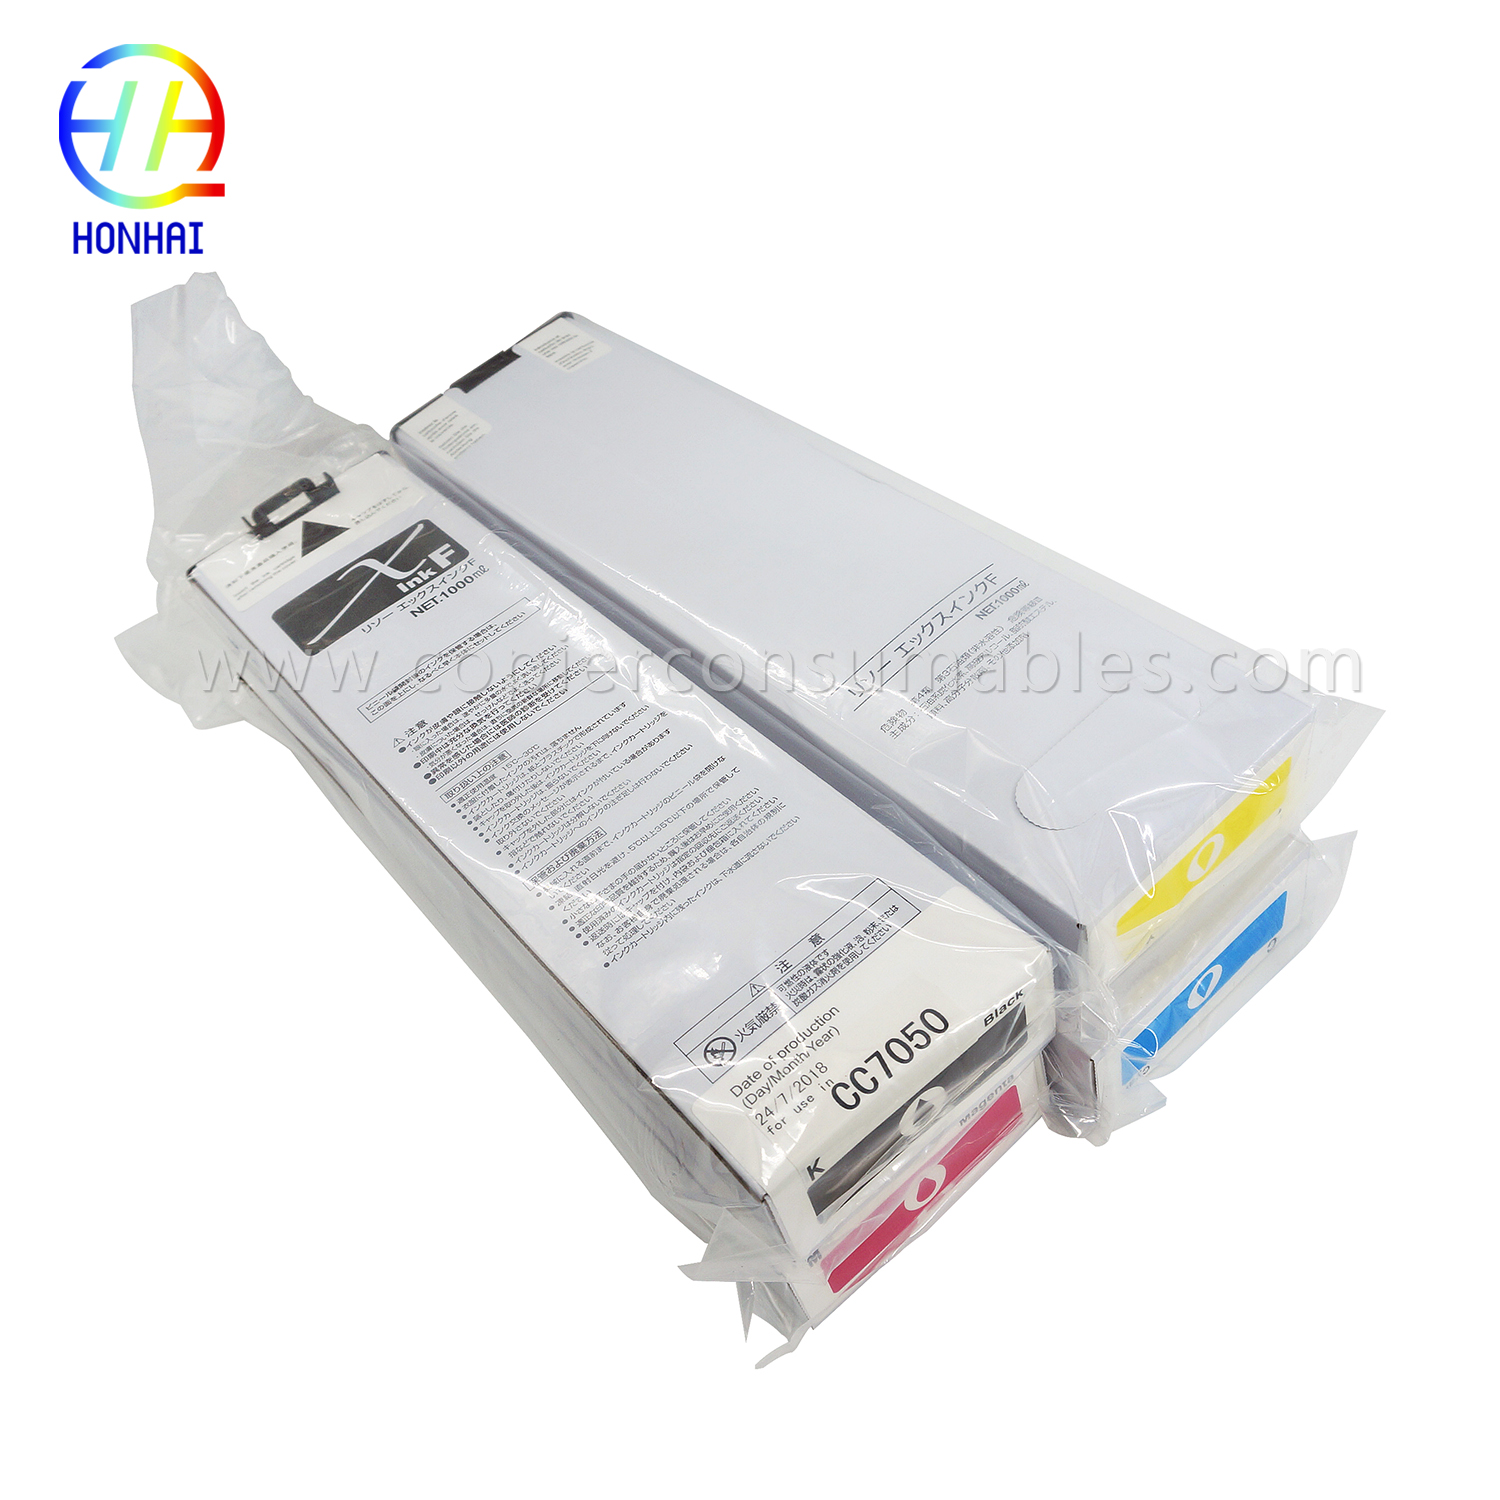 Ink Cartridge Risograph ComColor 3010 3050 3150 7010 7050 7150 9050 9150 HC 5000 5500 (S-6300G S-6301G S-6302G S-6303G) (8) 拷贝